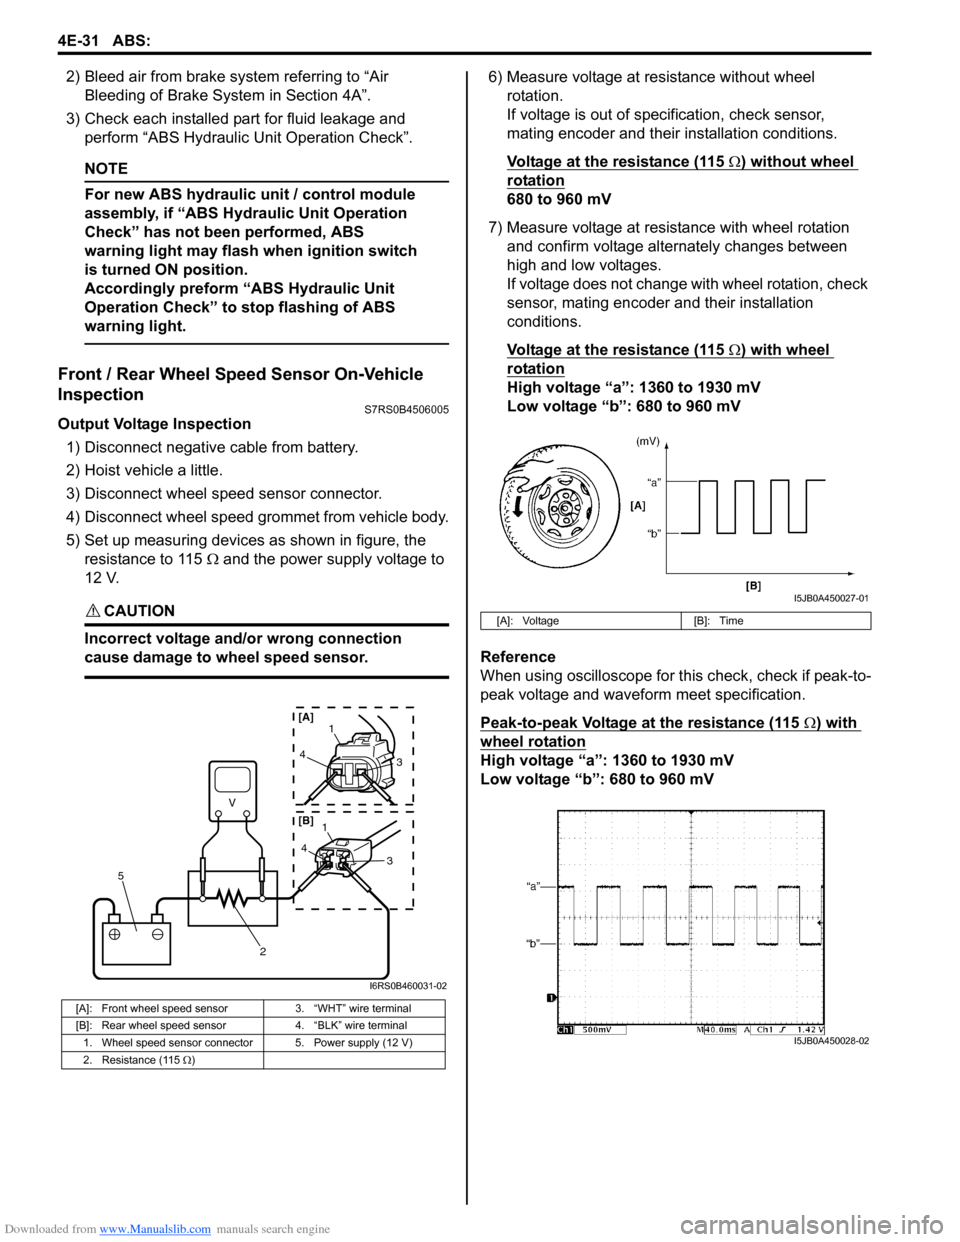 SUZUKI SWIFT 2004 2.G Service Workshop Manual Downloaded from www.Manualslib.com manuals search engine 4E-31 ABS: 
2) Bleed air from brake system referring to “Air Bleeding of Brake System in Section 4A”.
3) Check each installed part for flui